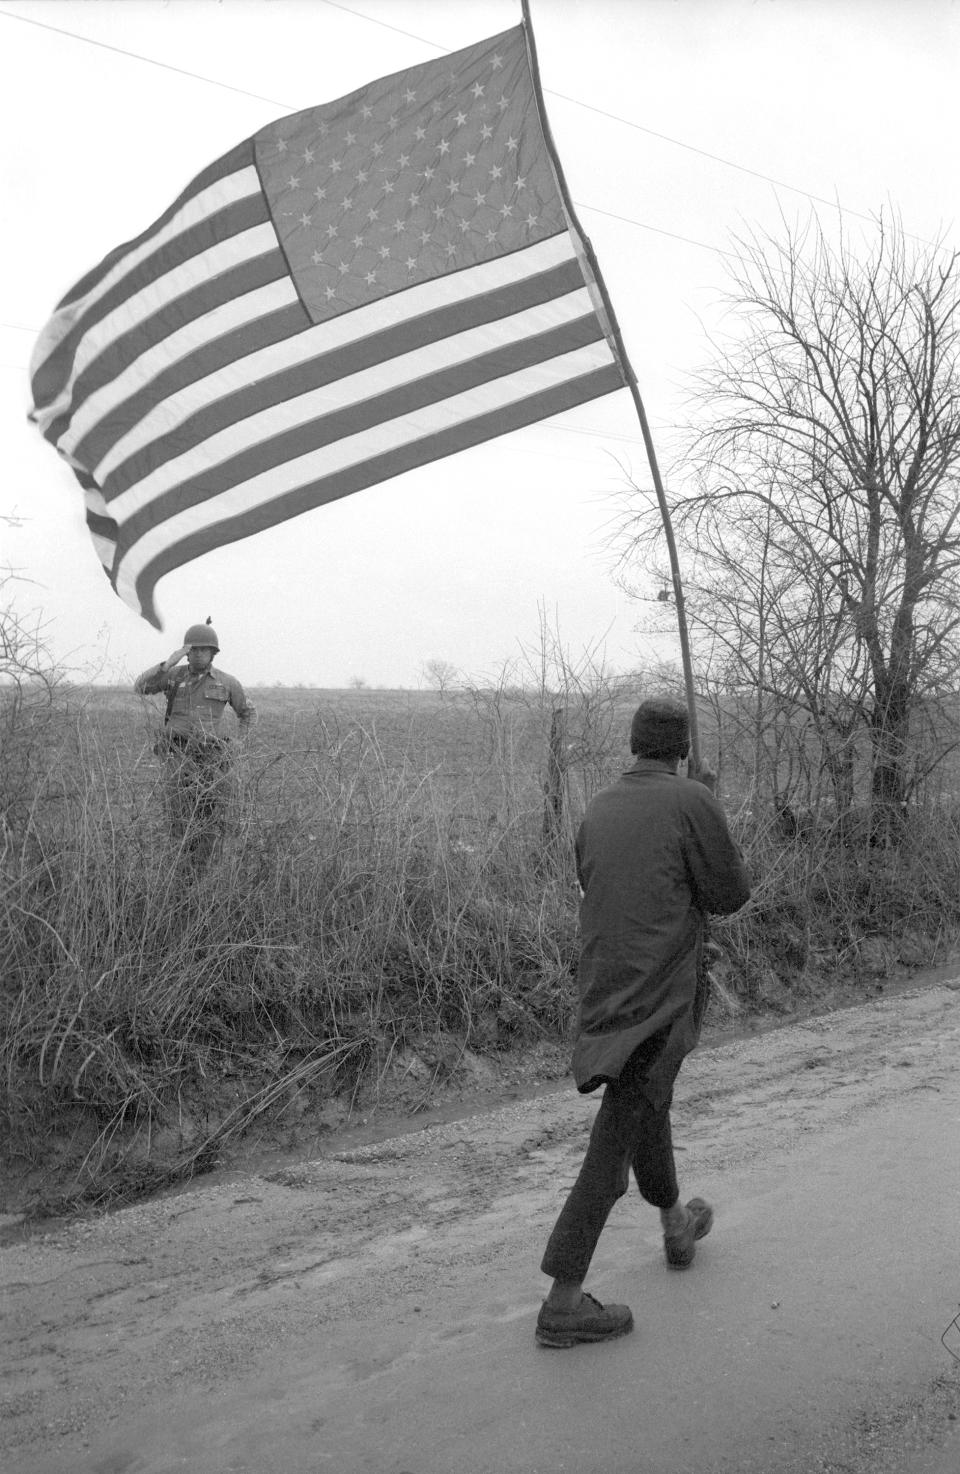 This March 23, 1965 photo provided by the Dan Budnik Estate shows a photograph taken by Dan Budnik of Will Henry 'Do-Right' being saluted by a sergeant of the Alabama National Guard during the Selma to Montgomery march in Alabama. Budnik an acclaimed photographer, noted for his portraits of artists in New York in the 1960s along with the civil rights movement and Native American culture, has died in Arizona at age 87. Budnik's nephew Kim Newton says his uncle died last Friday, Aug. 14, 2020, of natural causes at an assisted living facility in Tucson. (Dan Budnik/Dan Budnik Estate via AP)